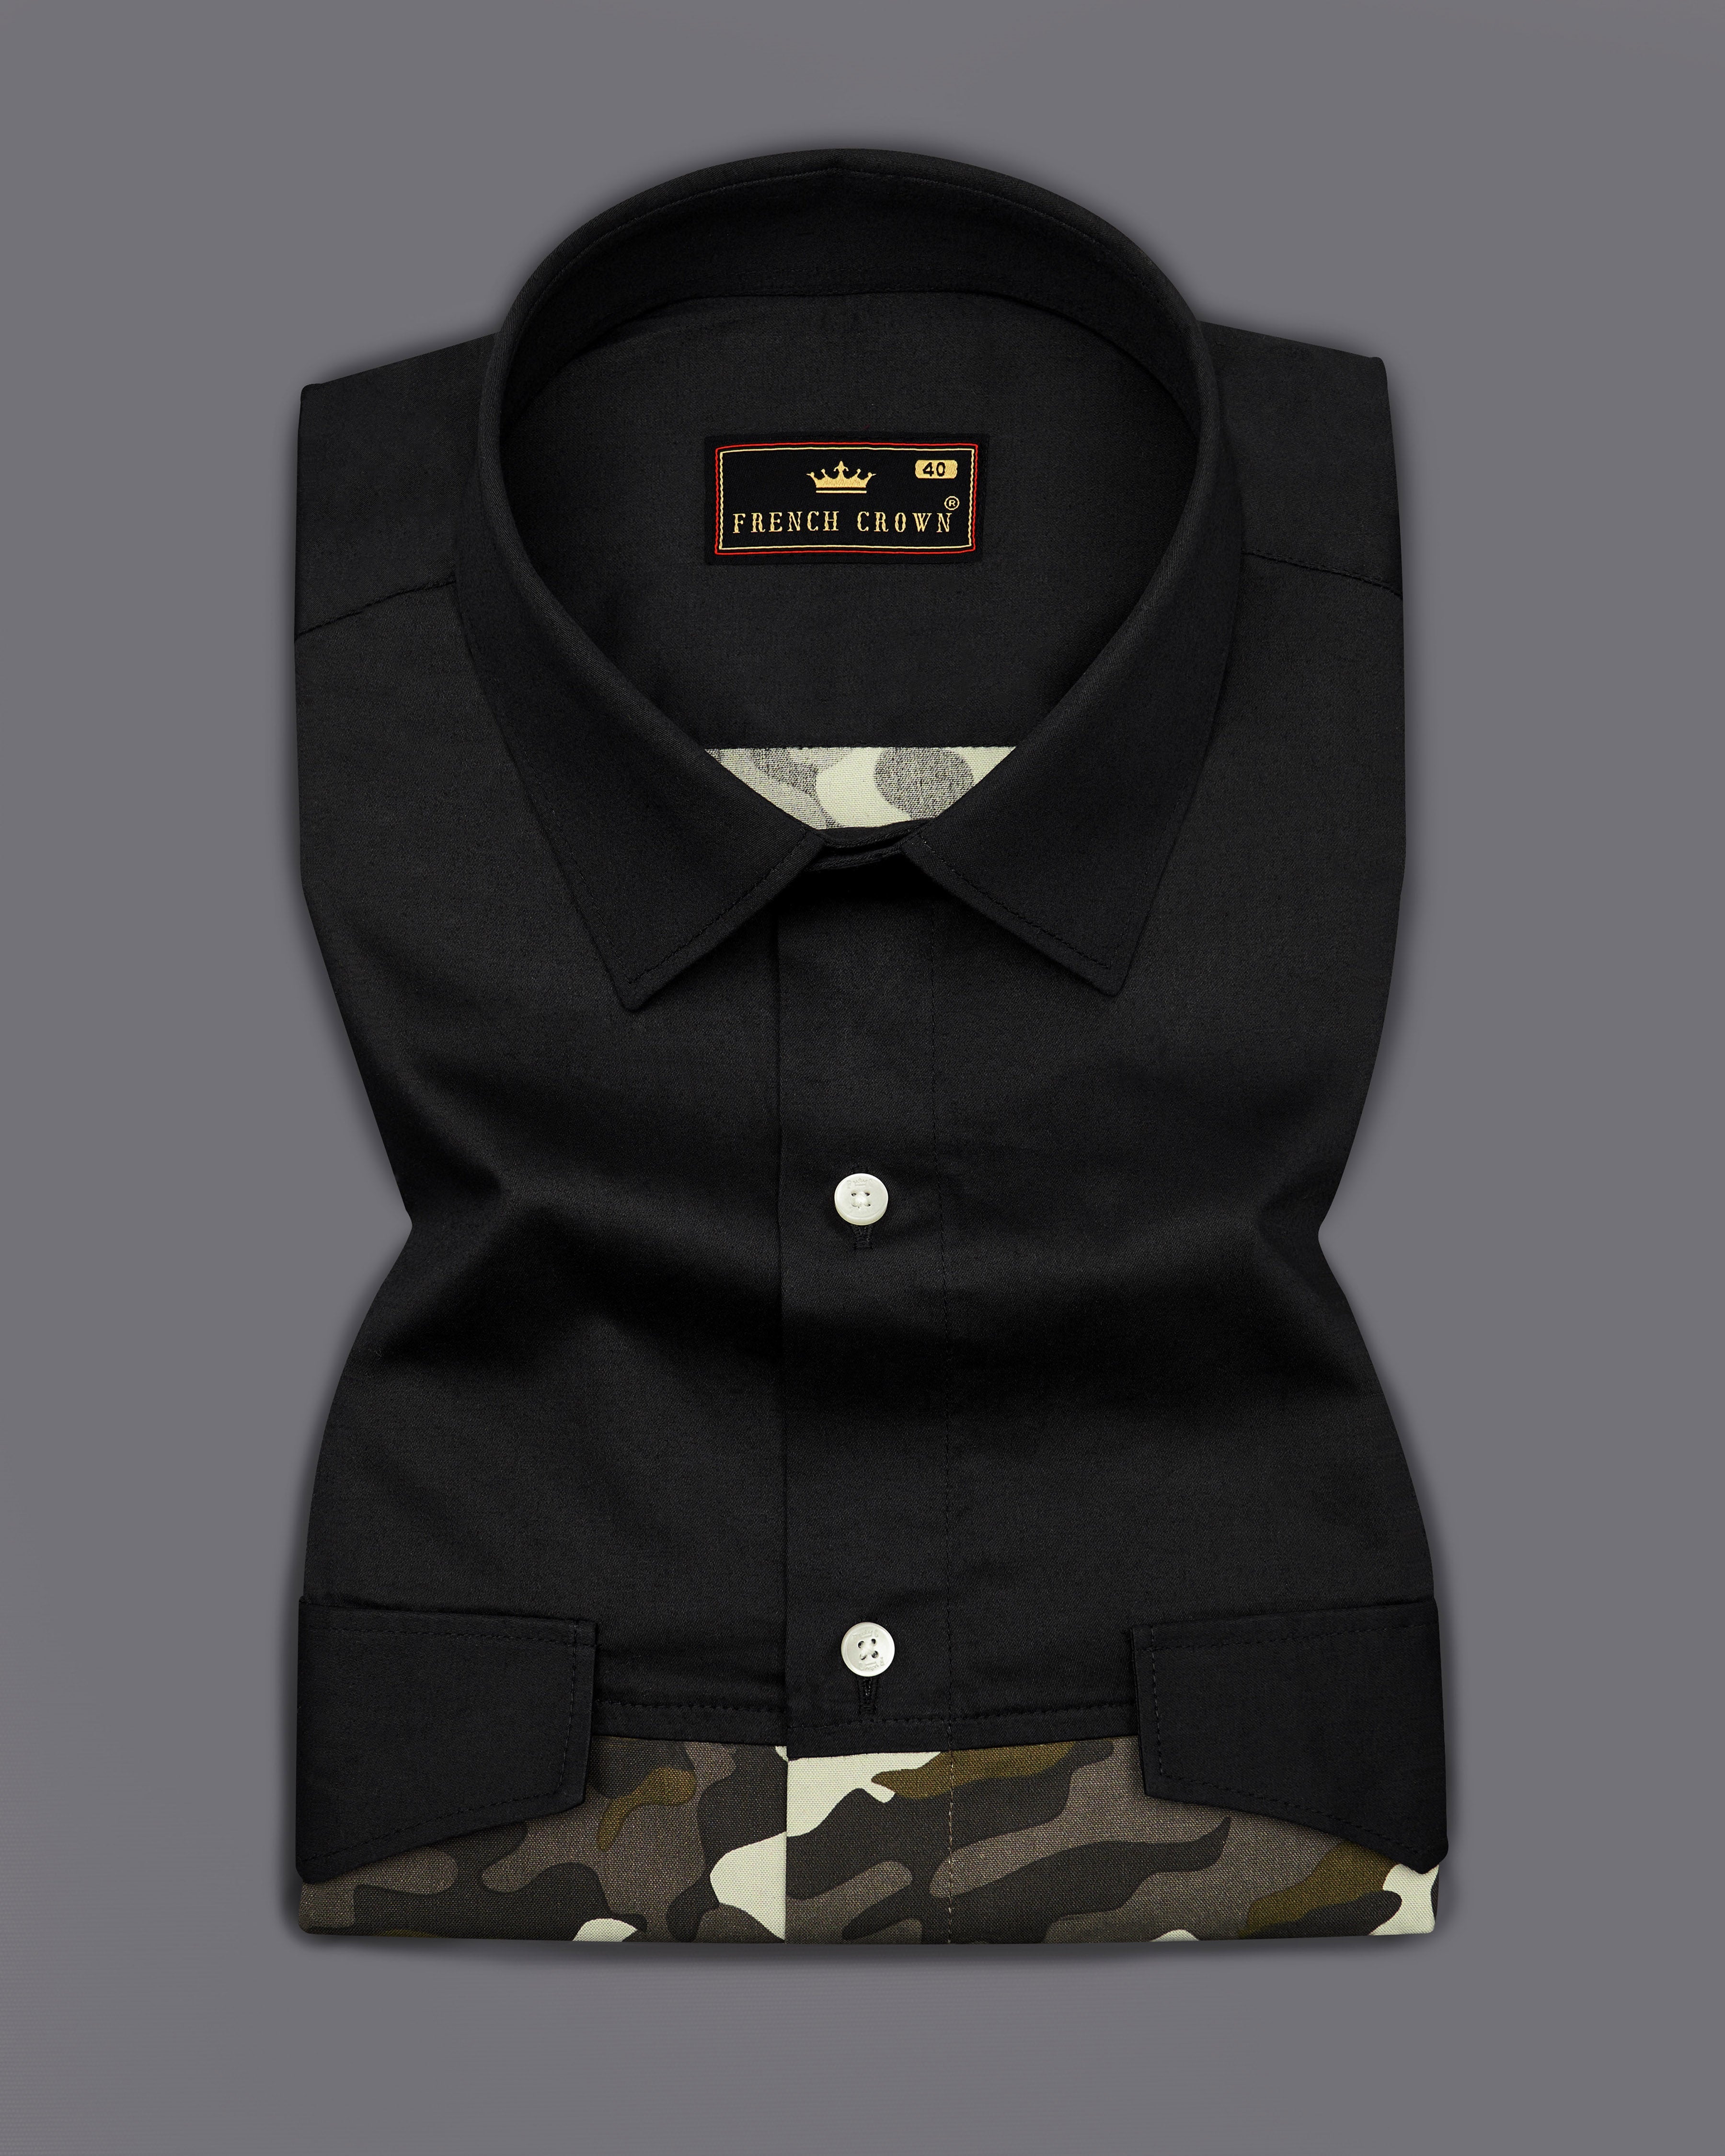 Jade Black with Birch Brown and Eggshell Cream Camouflage Royal Oxford Half Sleeves Designer Shirt